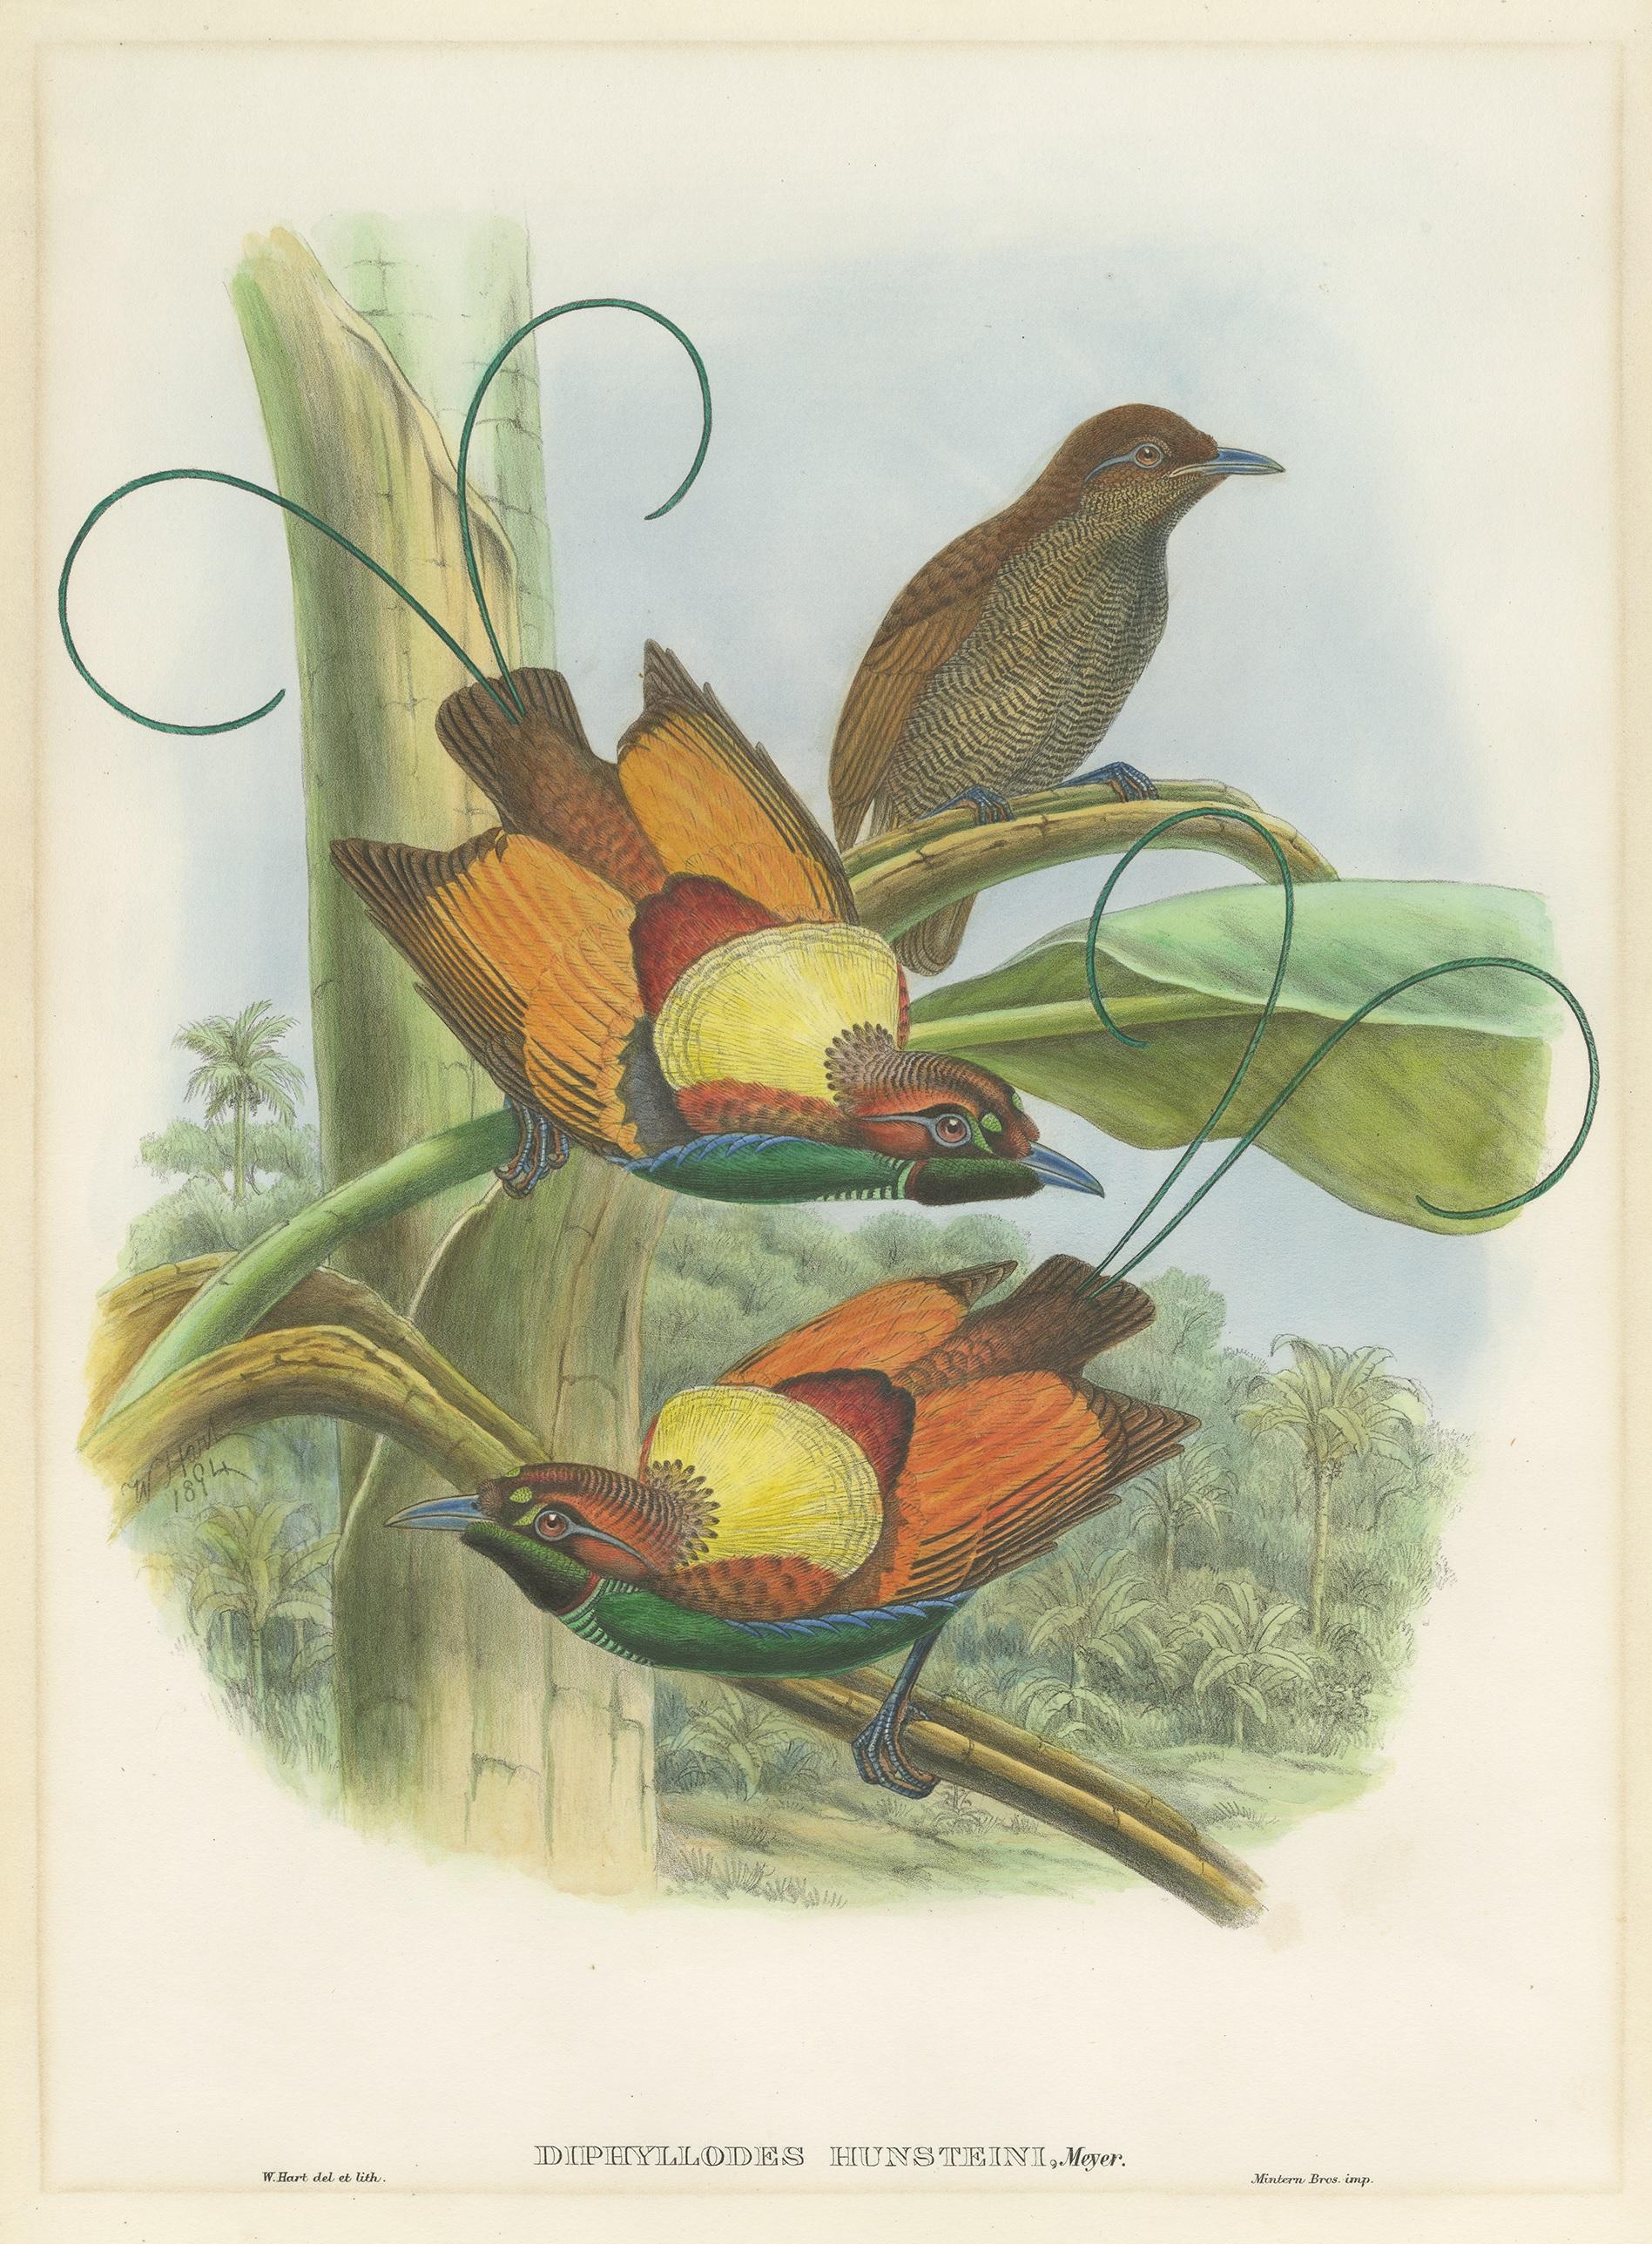 Antique bird print titled 'Diphyllodes Hunsteini'. Original lithograph of Hunstein's bird of paradise. This print originates from 'Birds of Asia' by John Gould. Published 1850-1853.